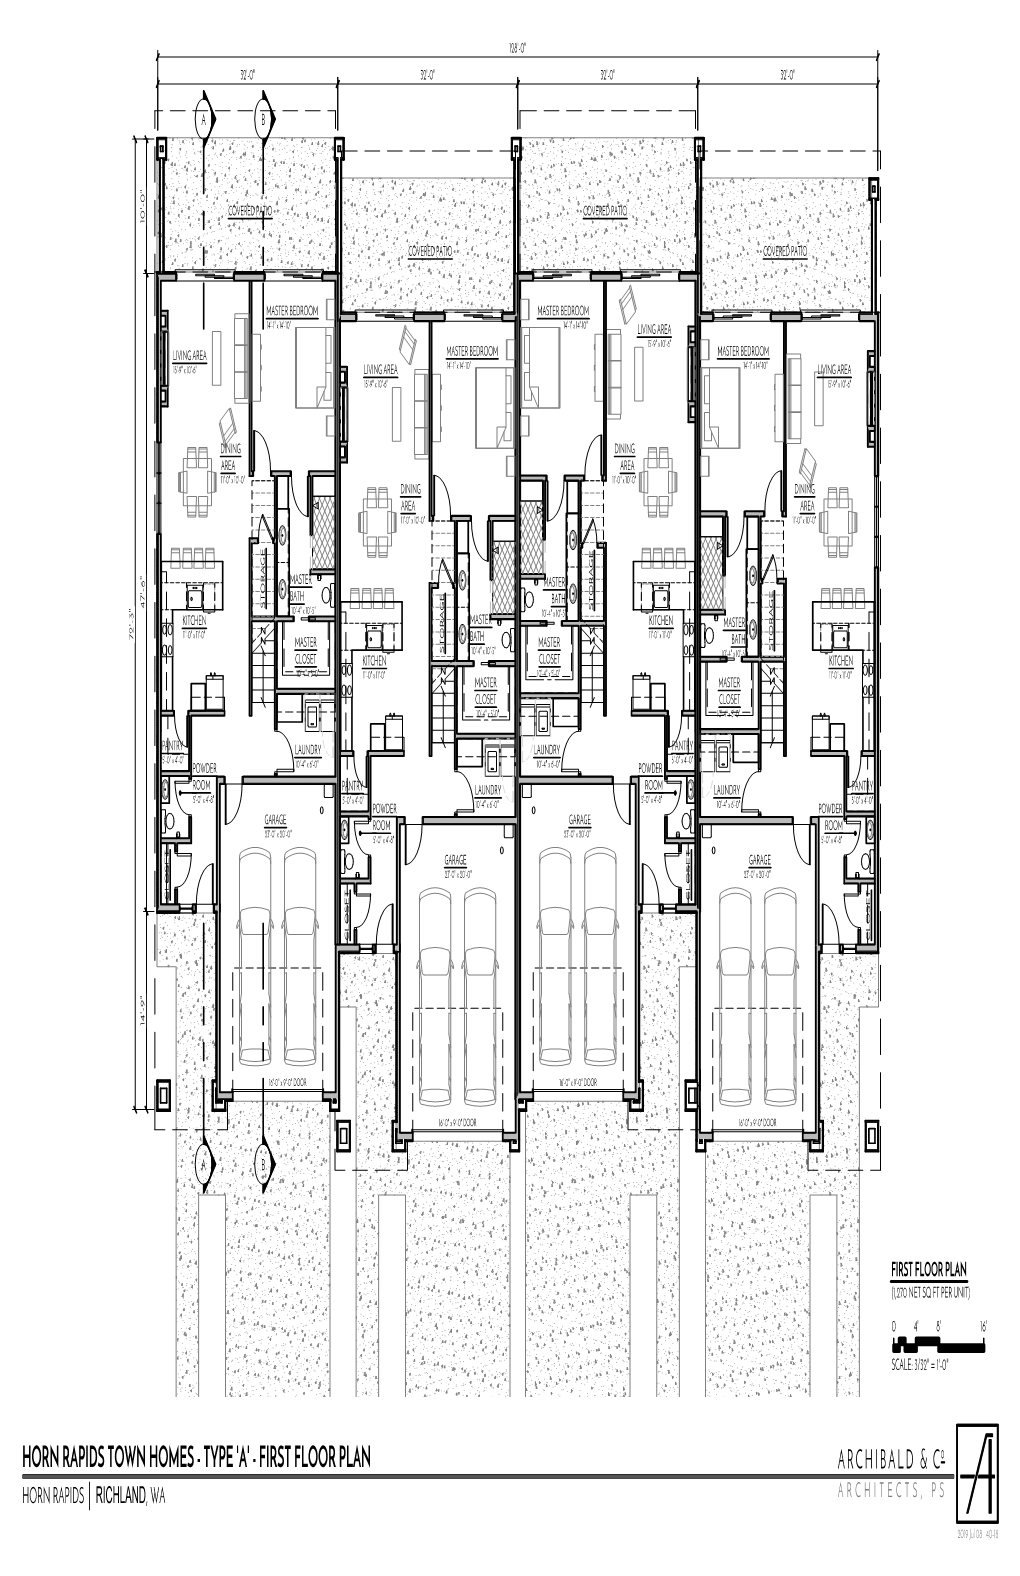 HORN RAPIDS TOWN HOMES - TYPE 'A' - FIRST FLOOR PLAN ARCHIBALD & Co HORN RAPIDS │ RICHLAND, WA ARCHITECTS, PS